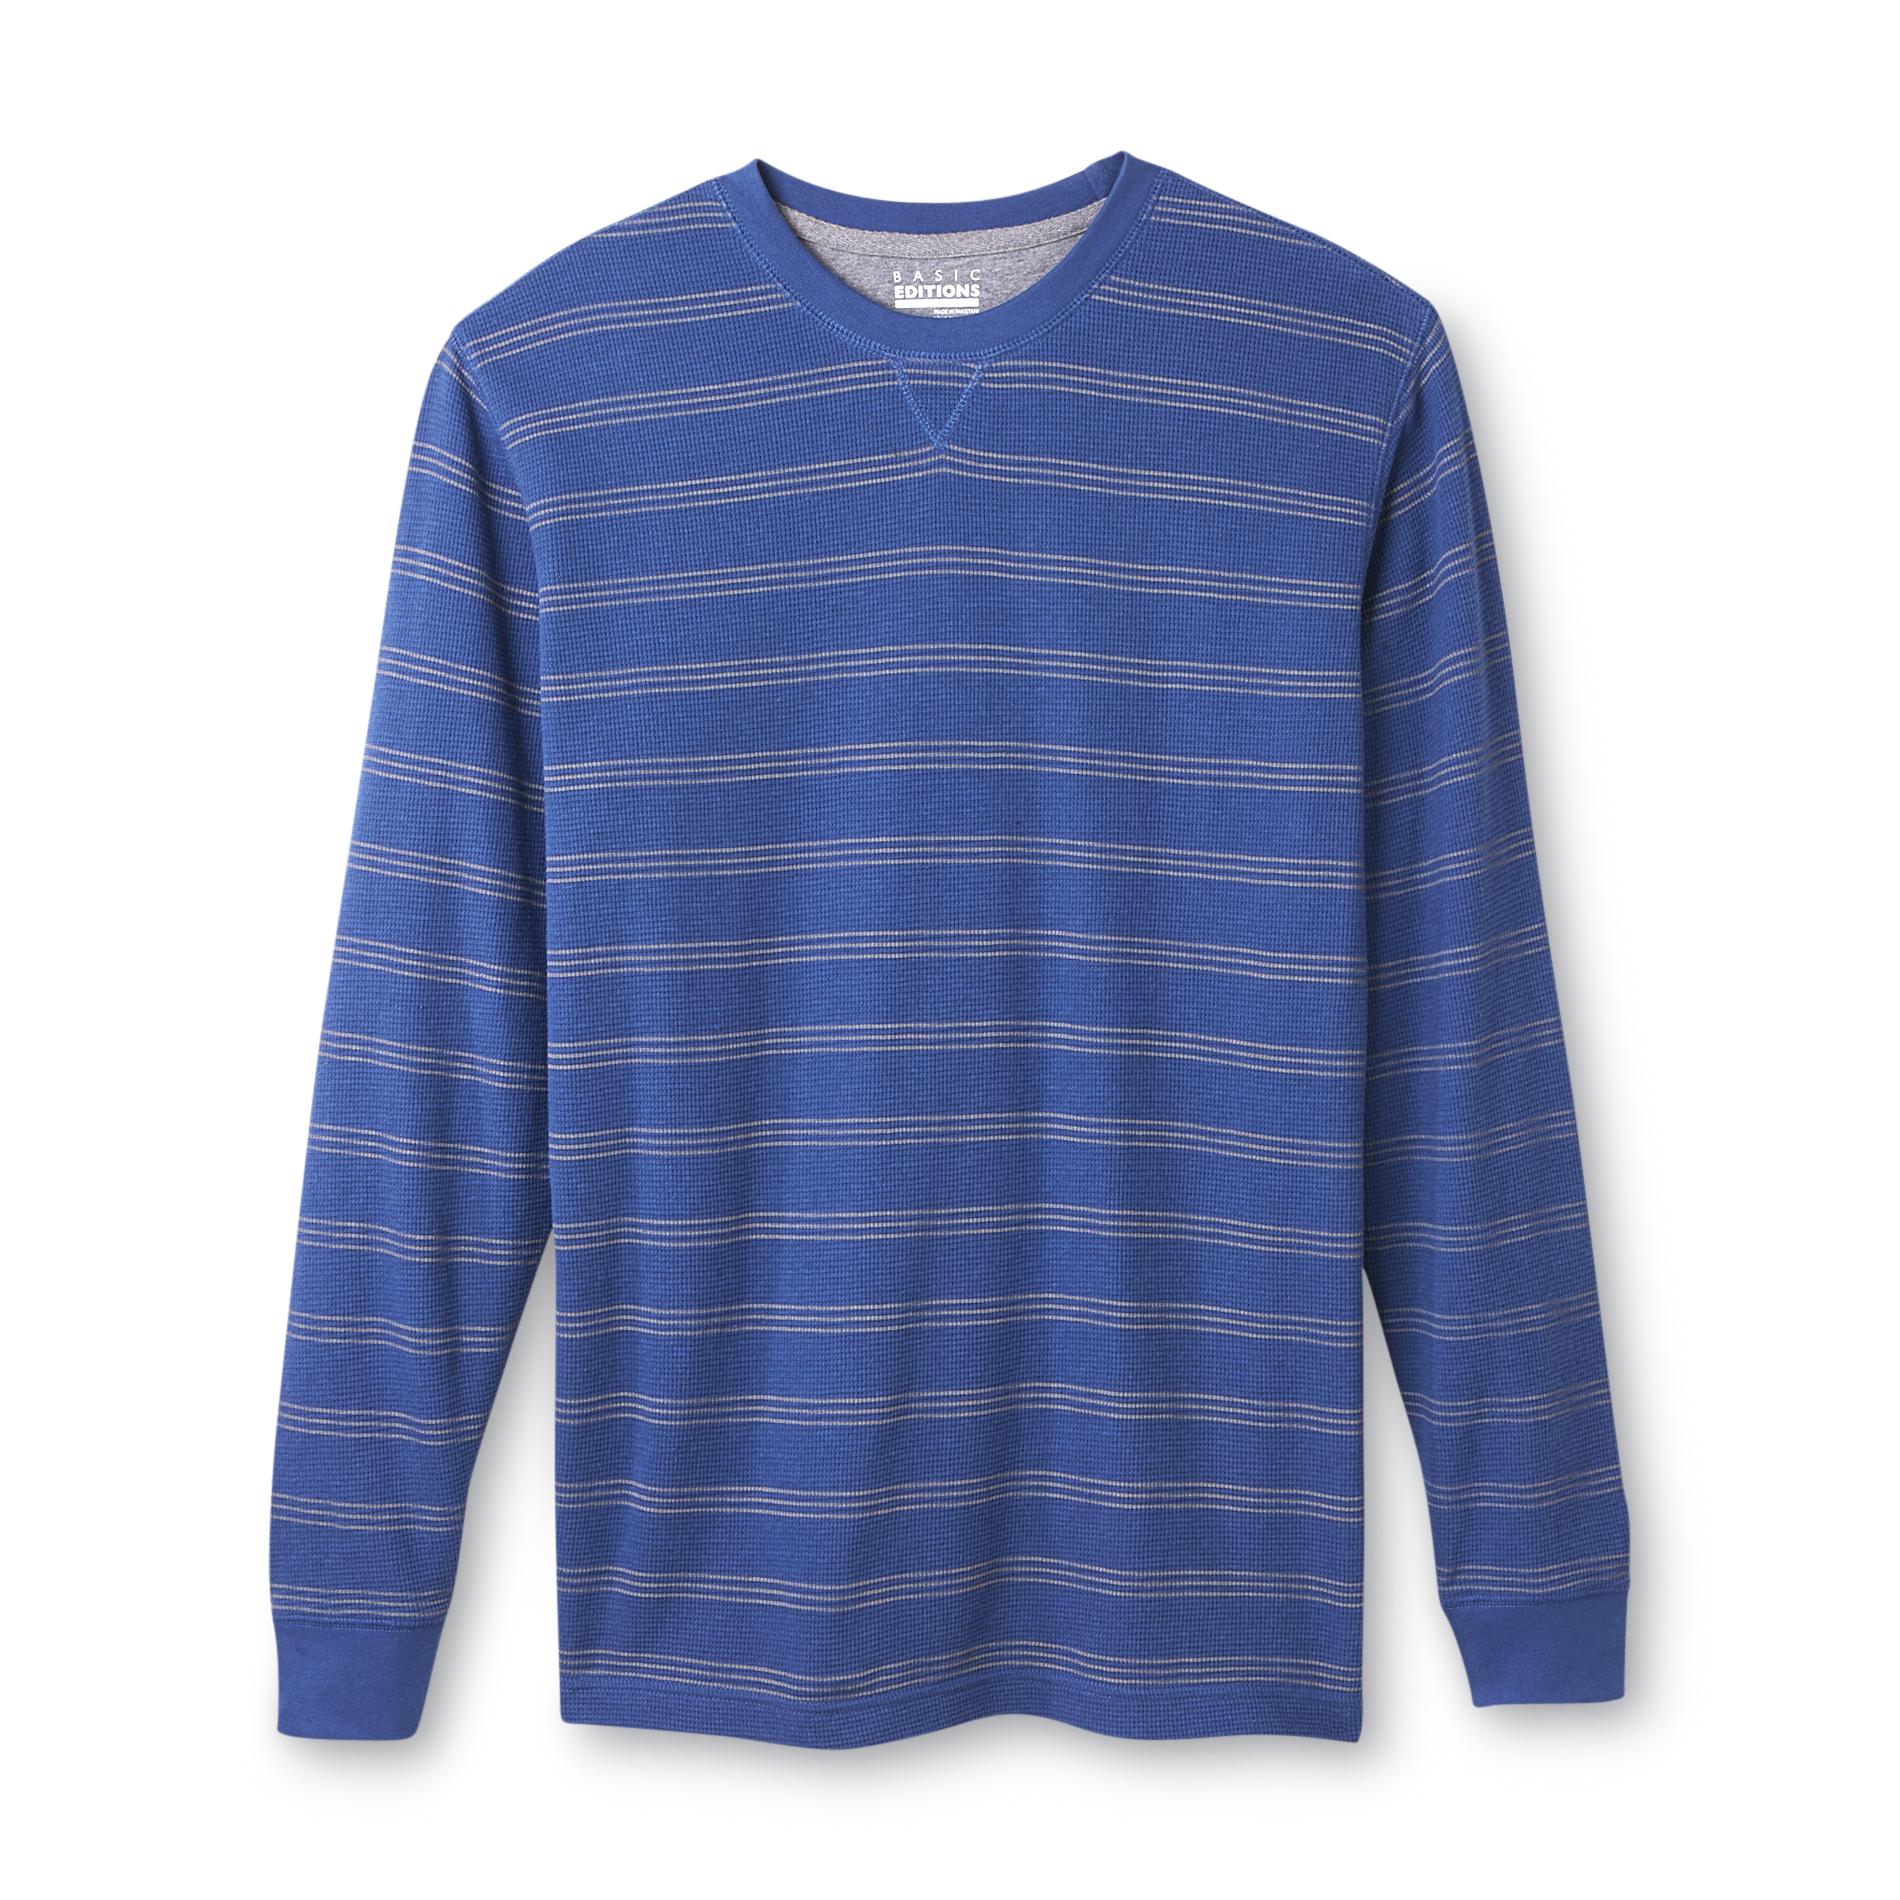 Basic Editions Men's Thermal Shirt - Striped